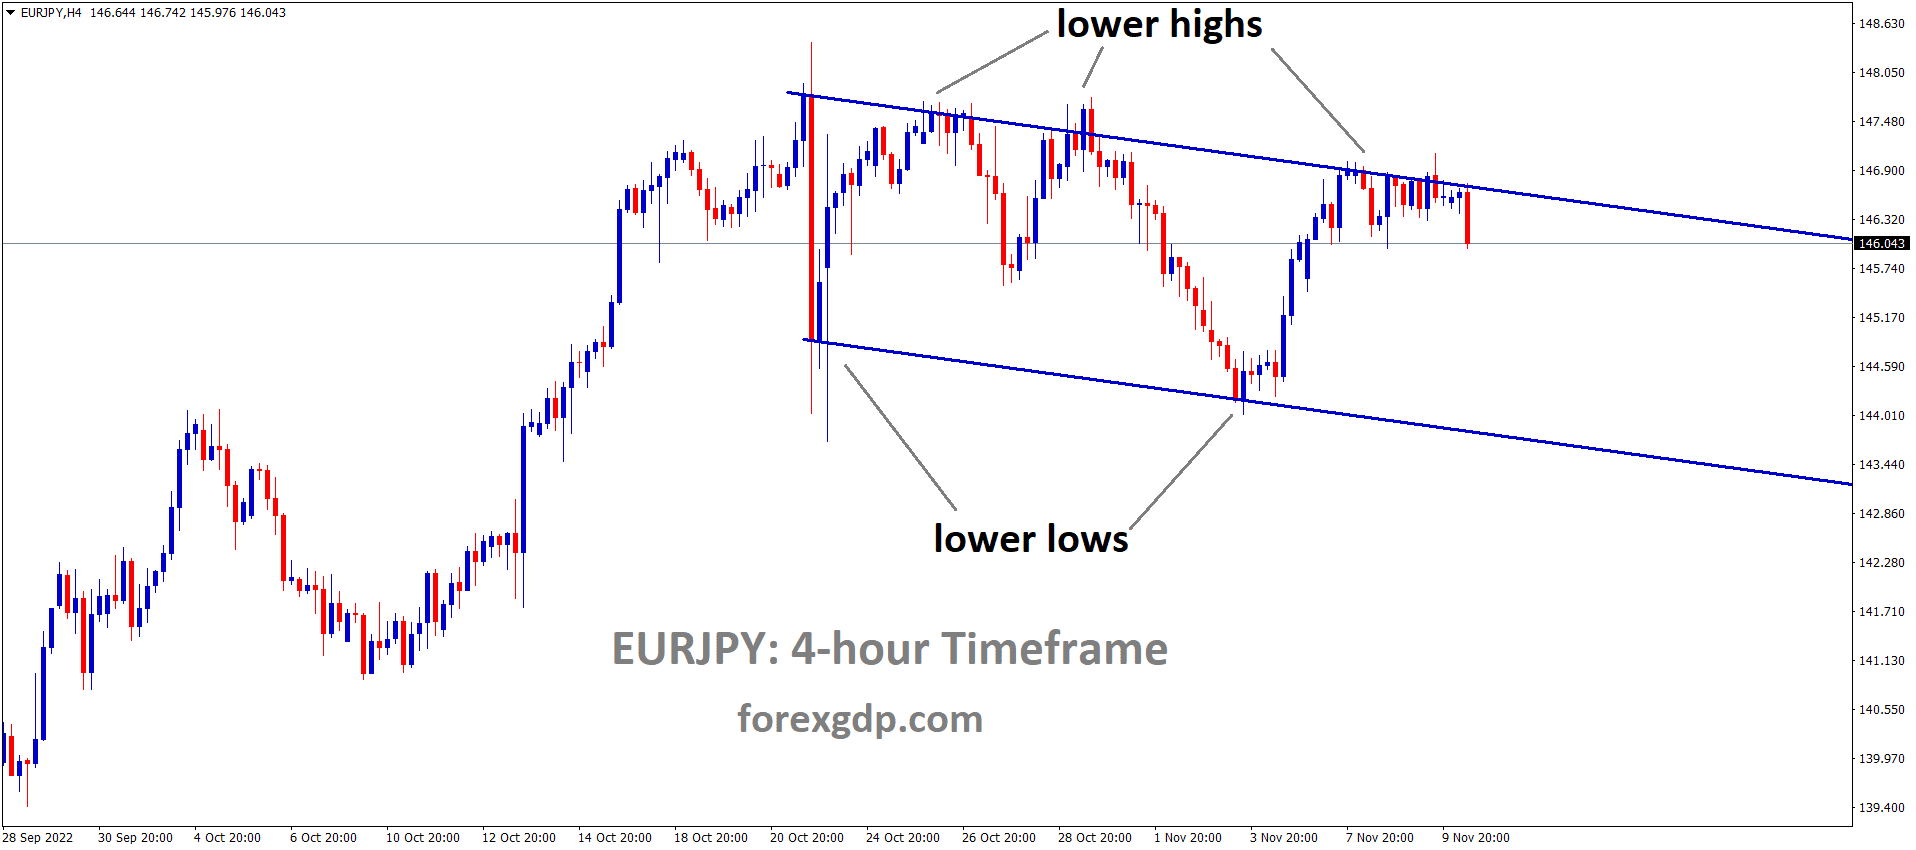 EURJPY is moving in the Descending channel and the market has fallen from the lower high area of the channel